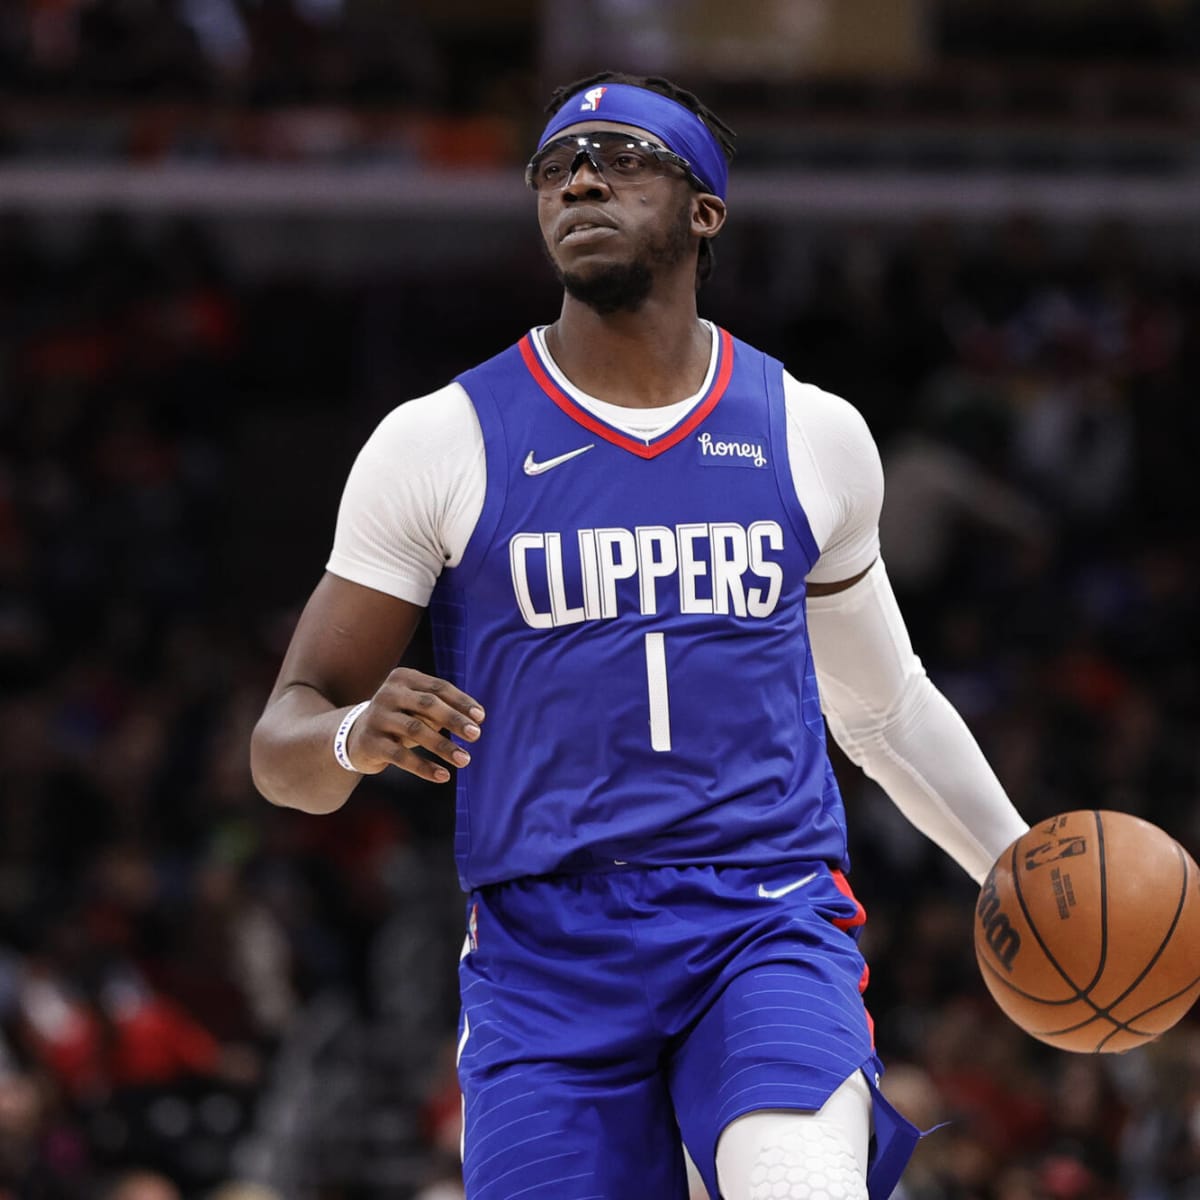 Clippers expected to name Reggie Jackson starting point guard for